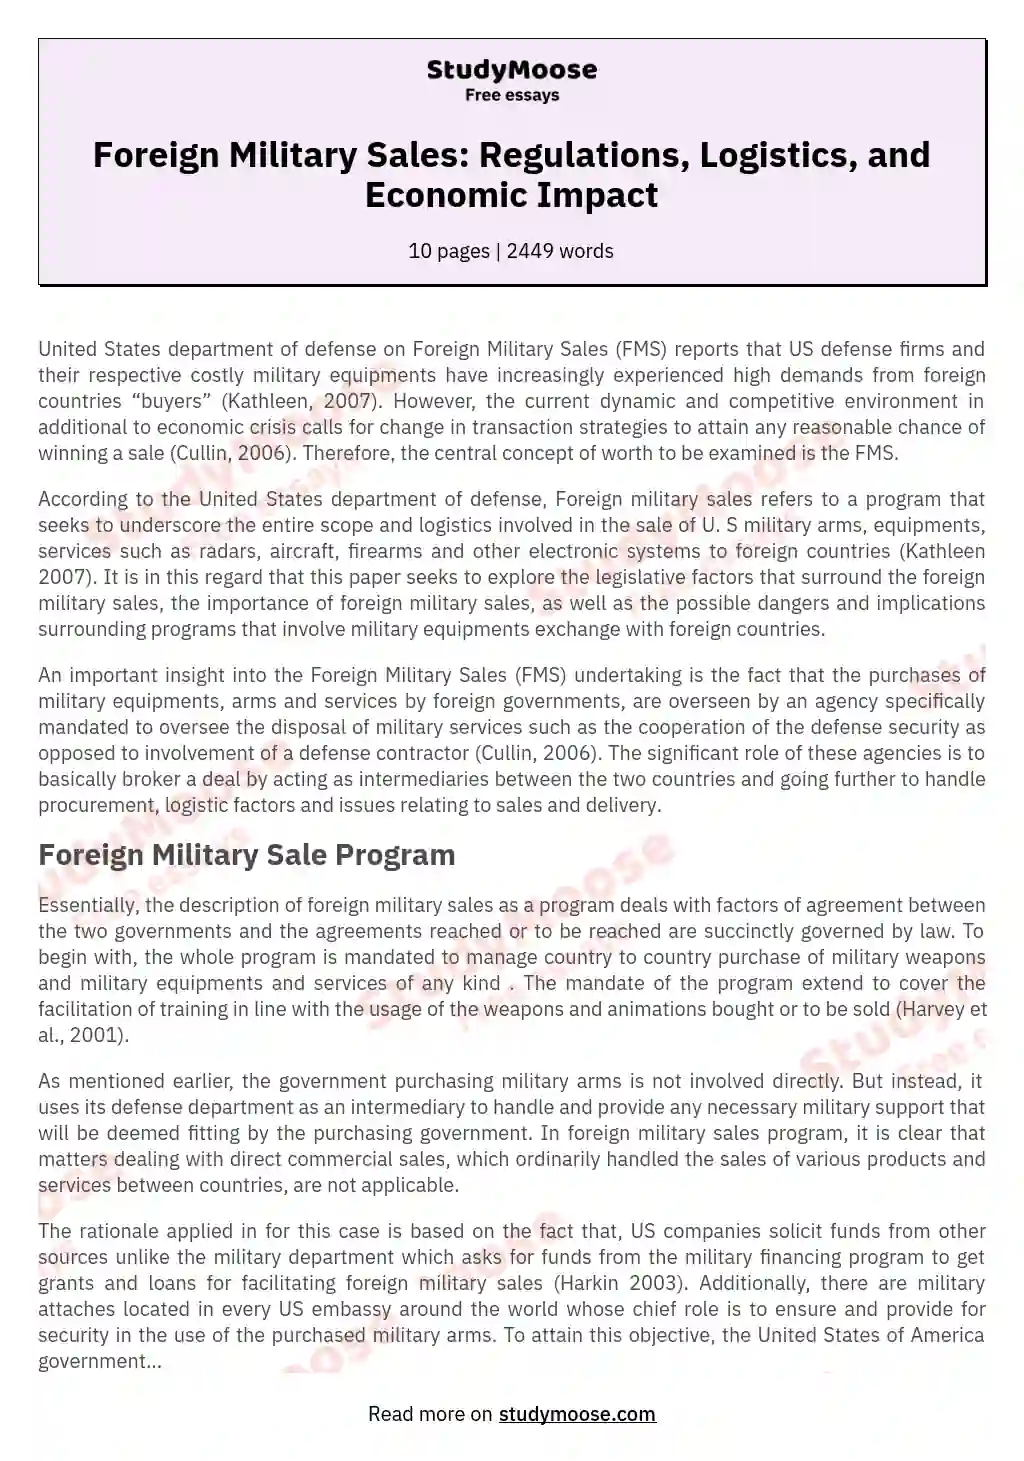 Foreign Military Sales: Regulations, Logistics, and Economic Impact essay